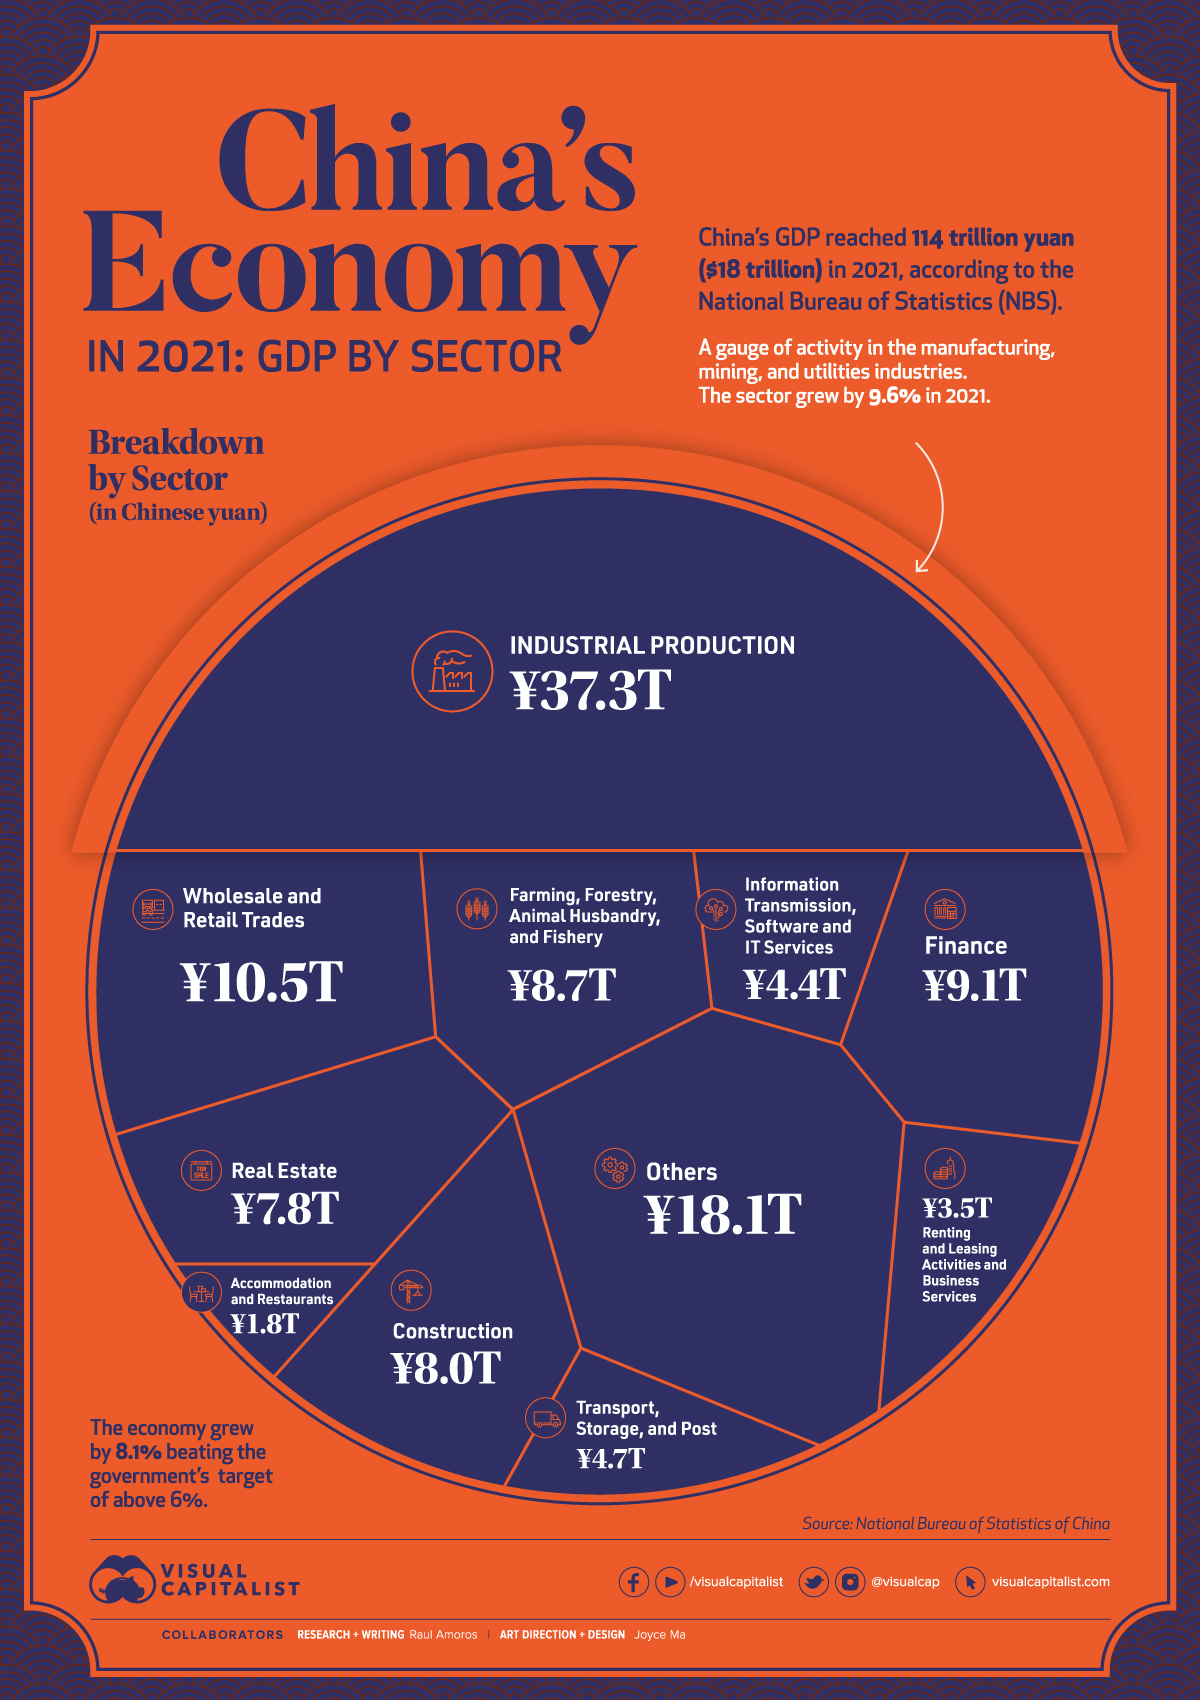 Visualizing China's Economy By Sector in 2021